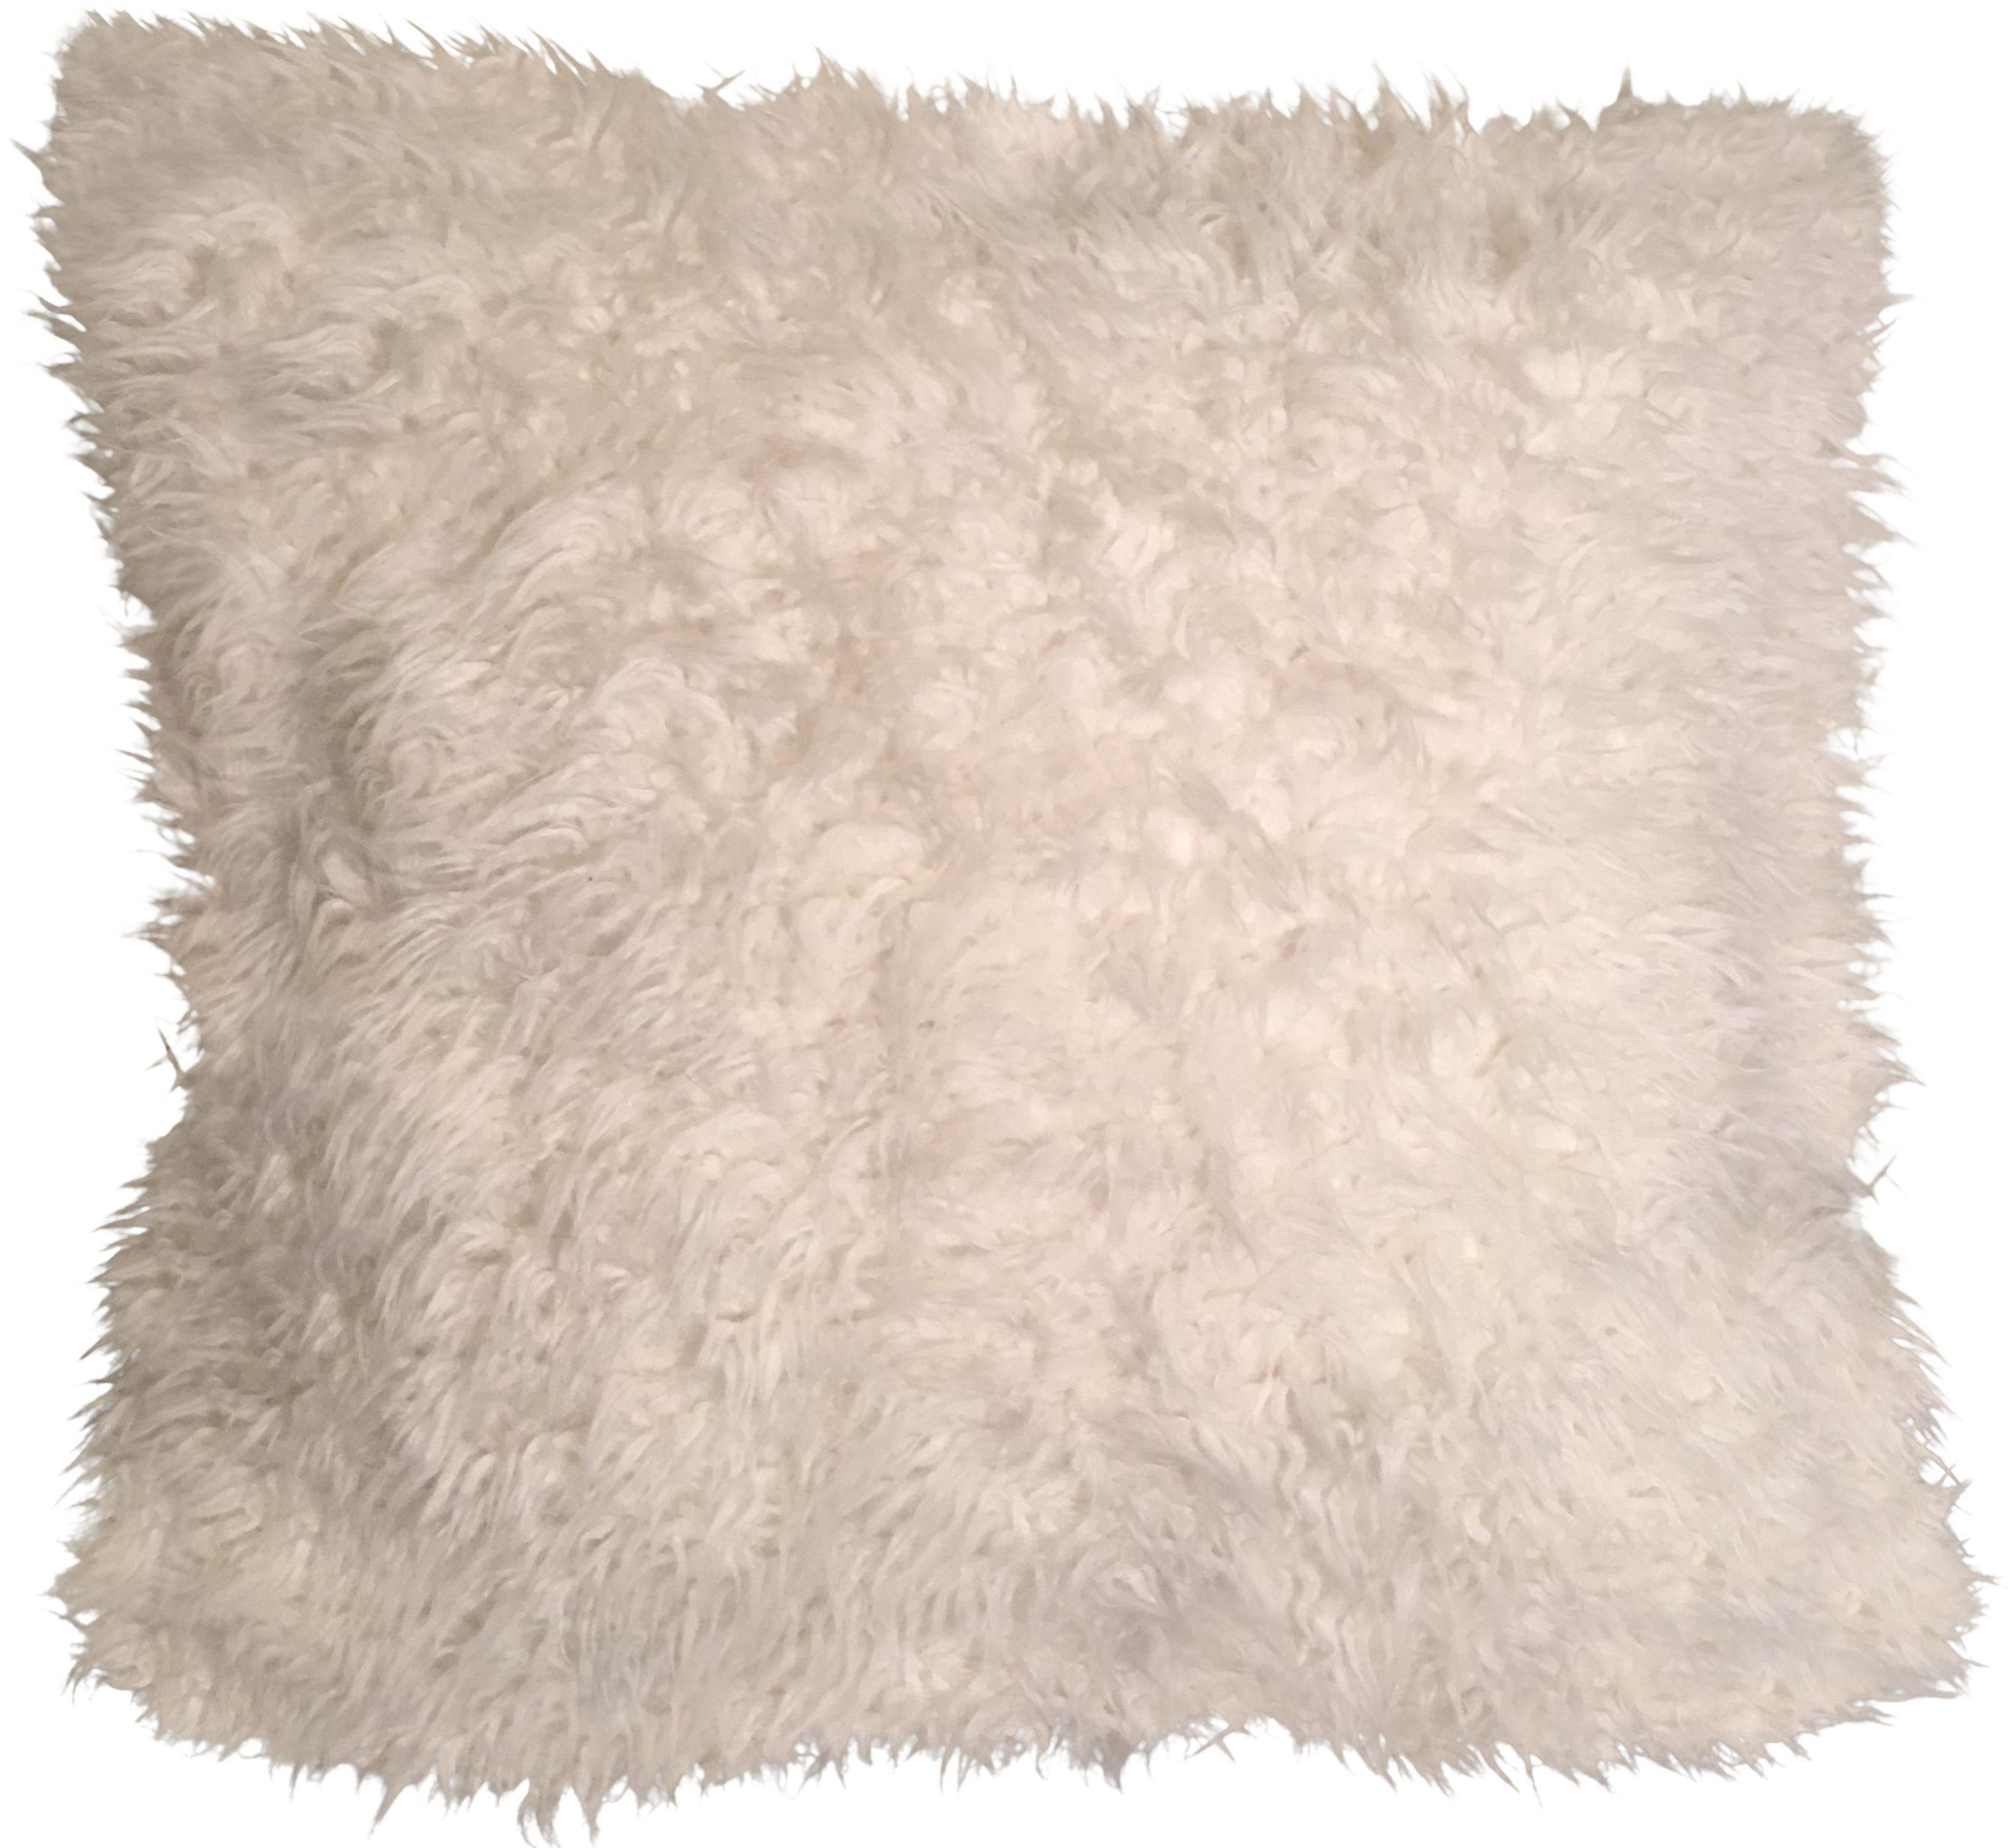 A White Fluffy Pillow On A Black Background